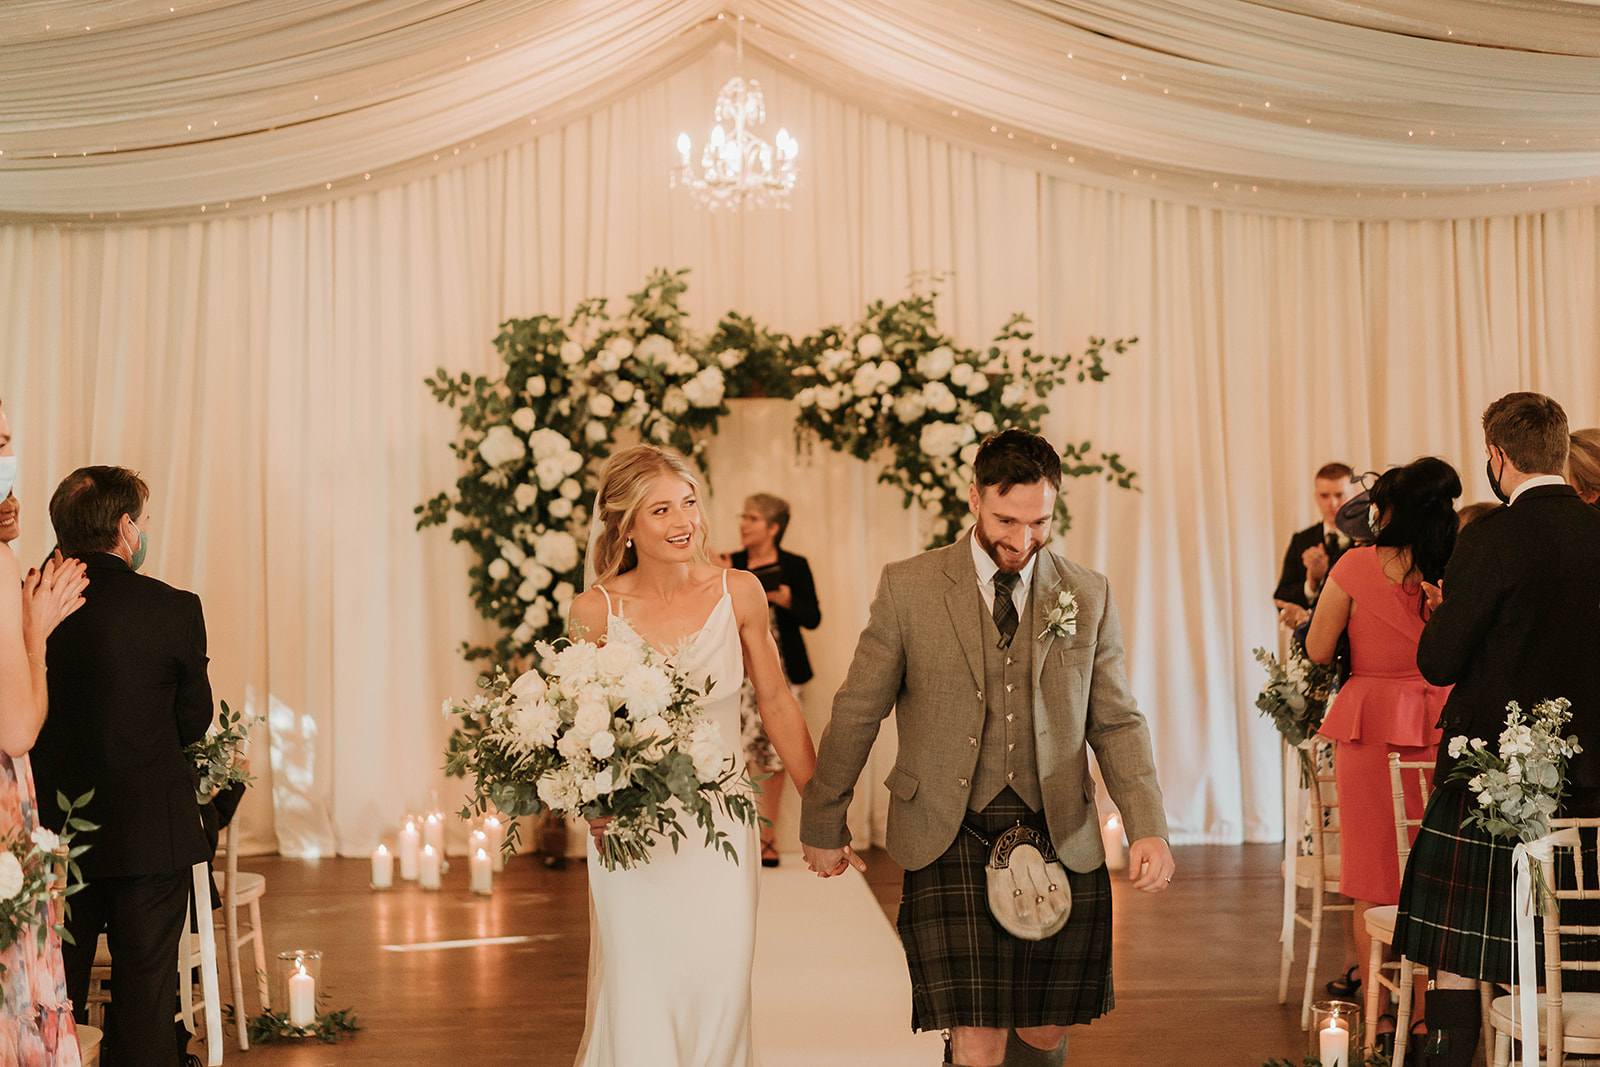 A COUPLE WALKING DOWN THE AISLE FROM GETTING MARRIED AT LOGIE COUNTRY HOUSE